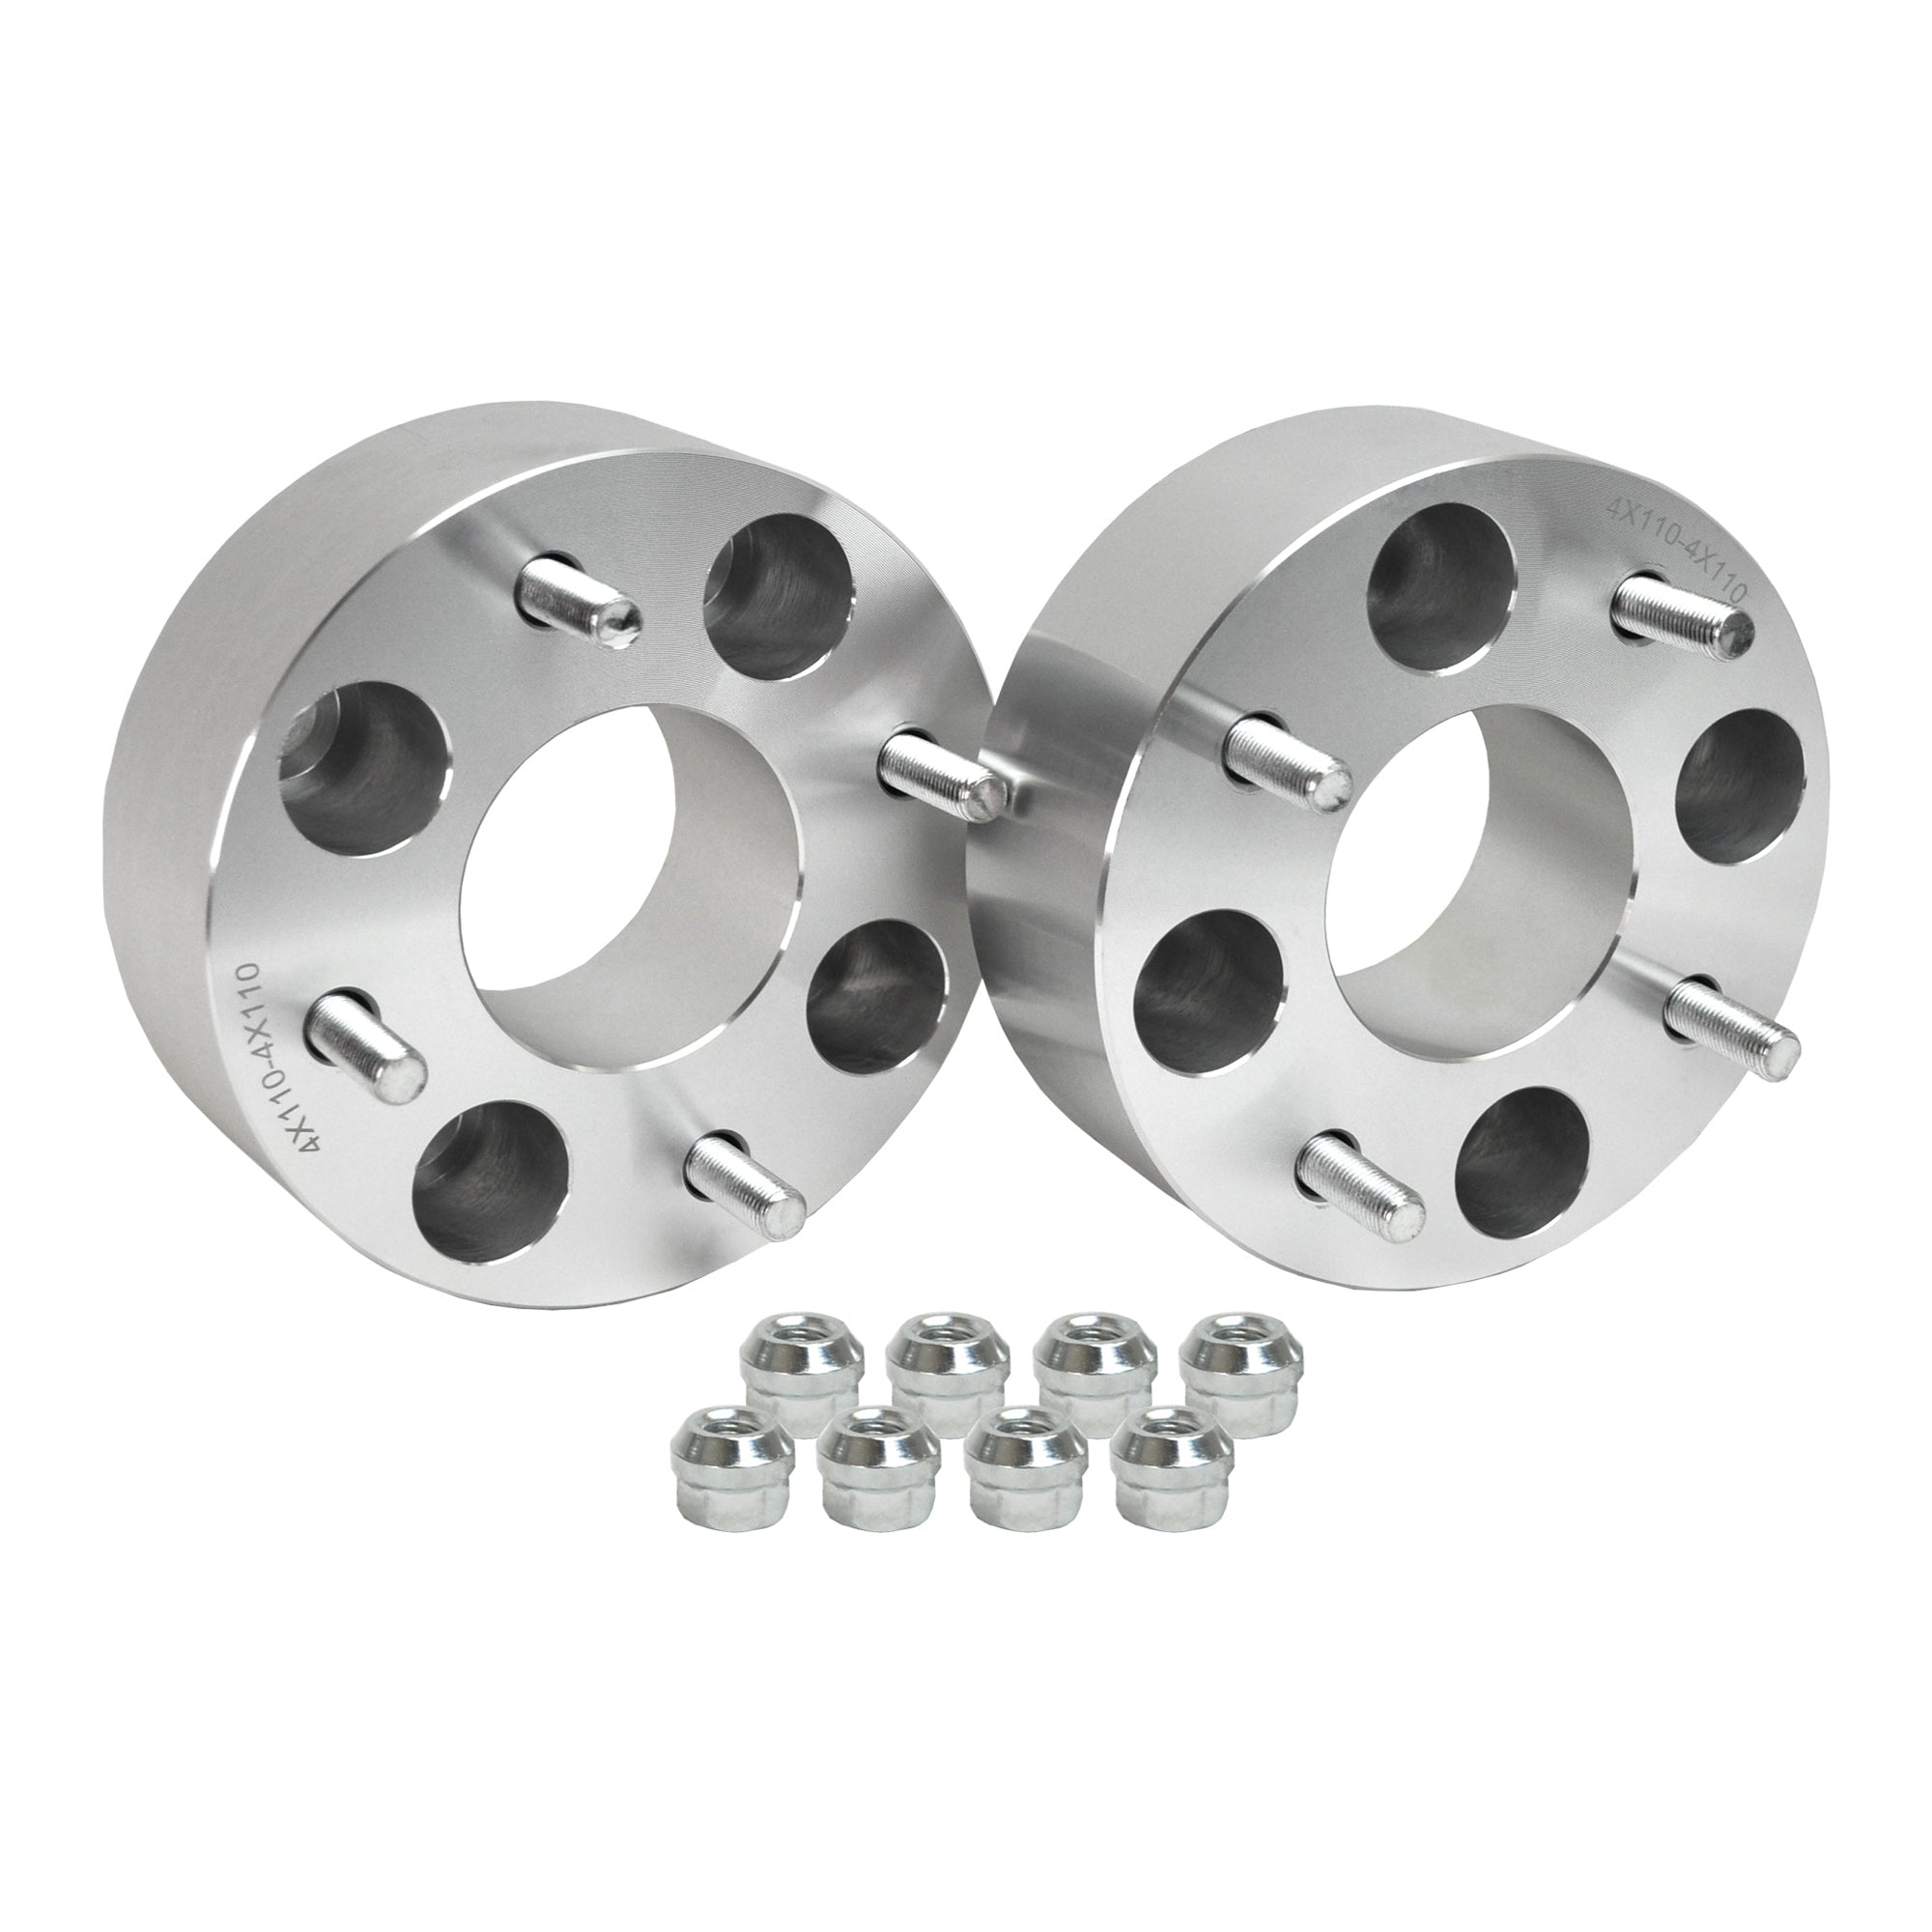 Wheel Spacer for Yamaha Wolverine 450 